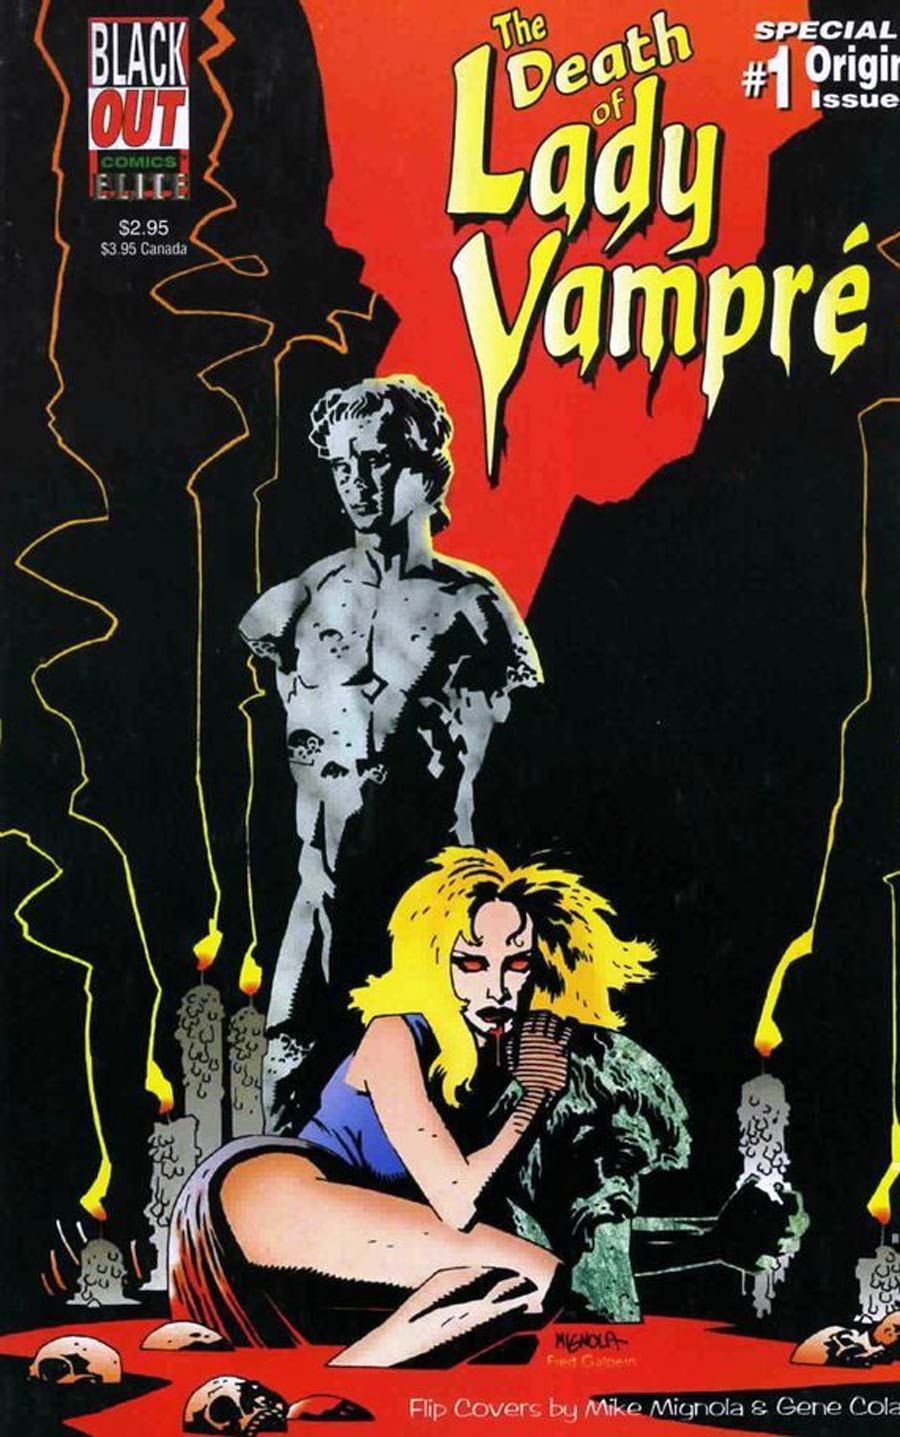 Death of Lady Vampre #1 Cover A Mike Mignola